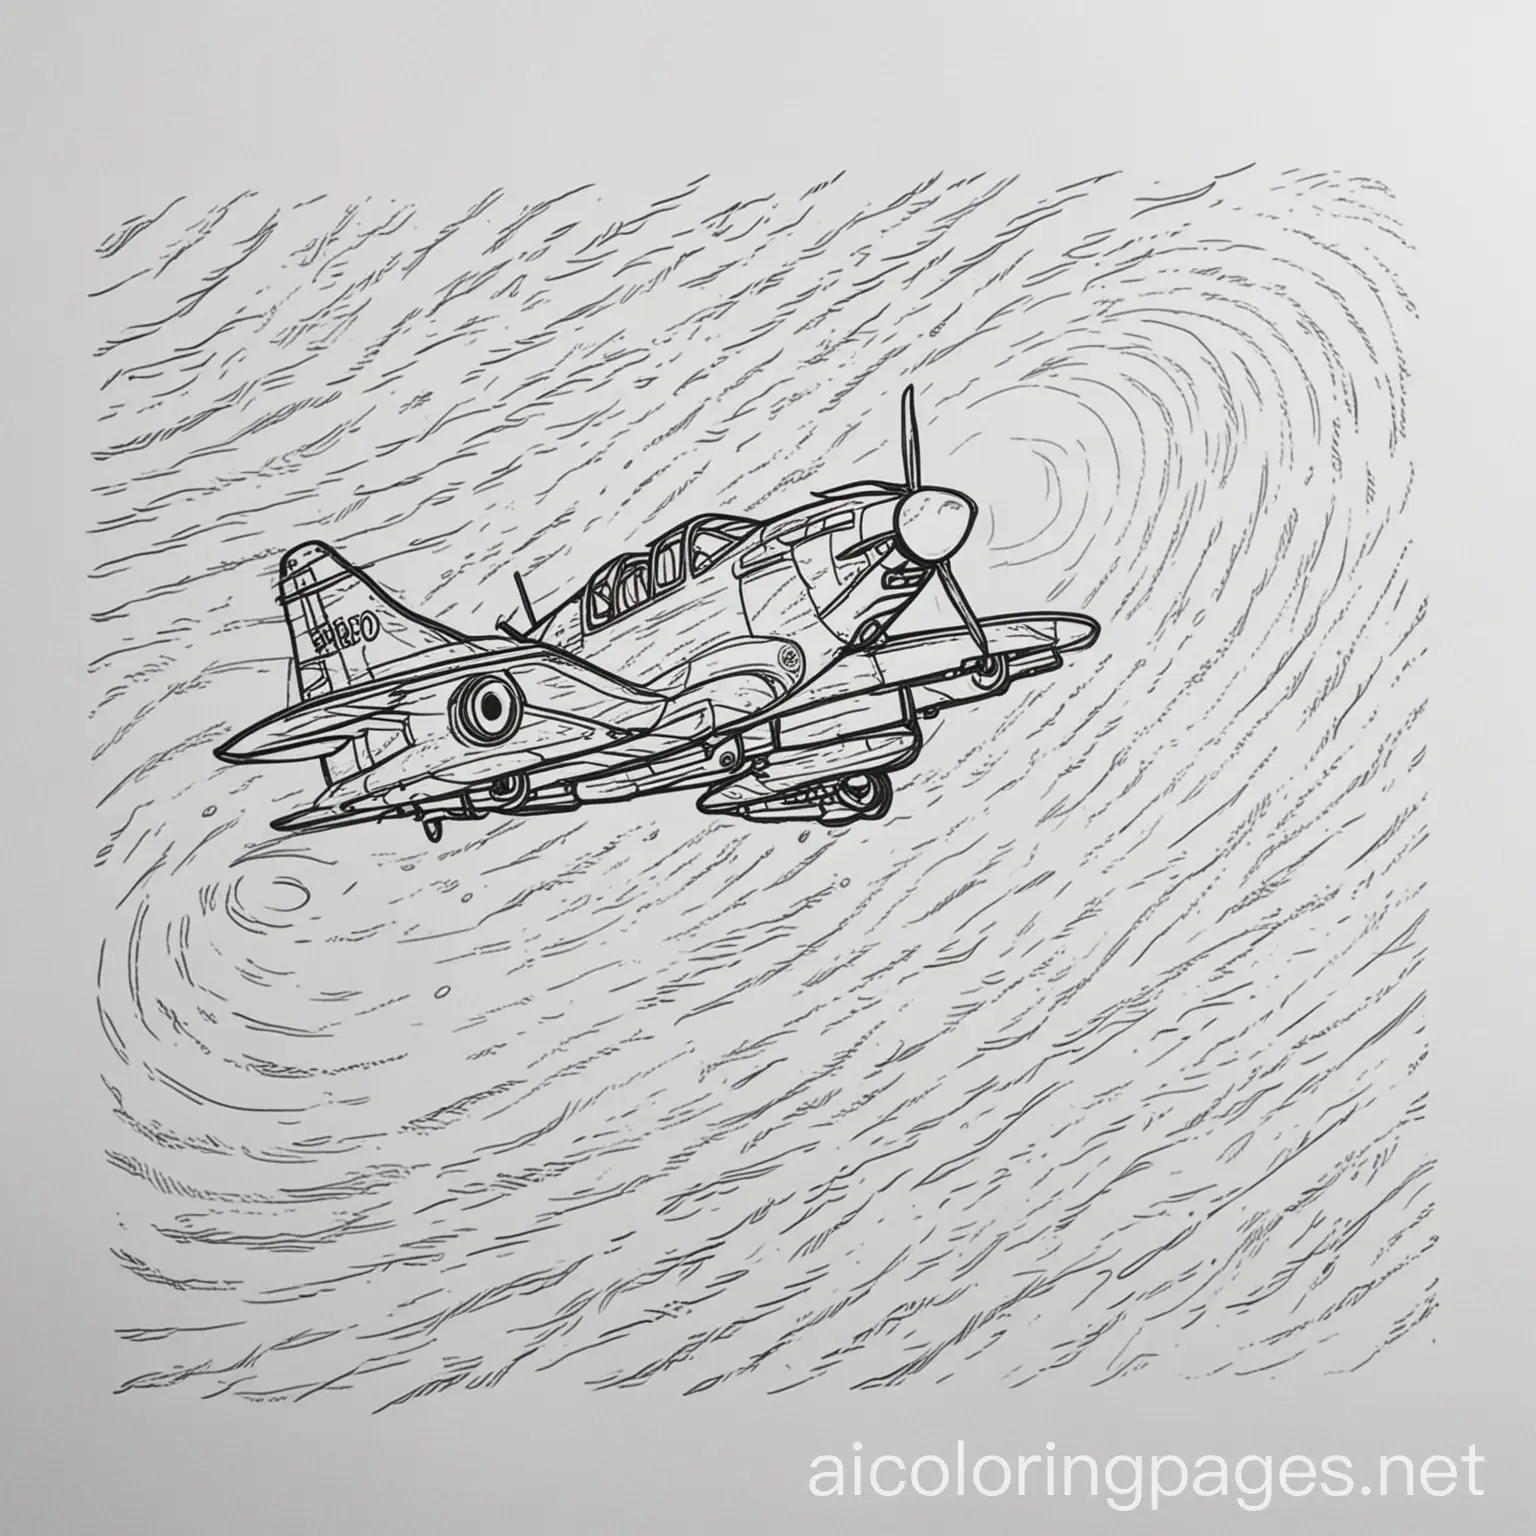 hurricane, Coloring Page, black and white, line art, white background, Simplicity, Ample White Space. The background of the coloring page is plain white to make it easy for young children to color within the lines. The outlines of all the subjects are easy to distinguish, making it simple for kids to color without too much difficulty